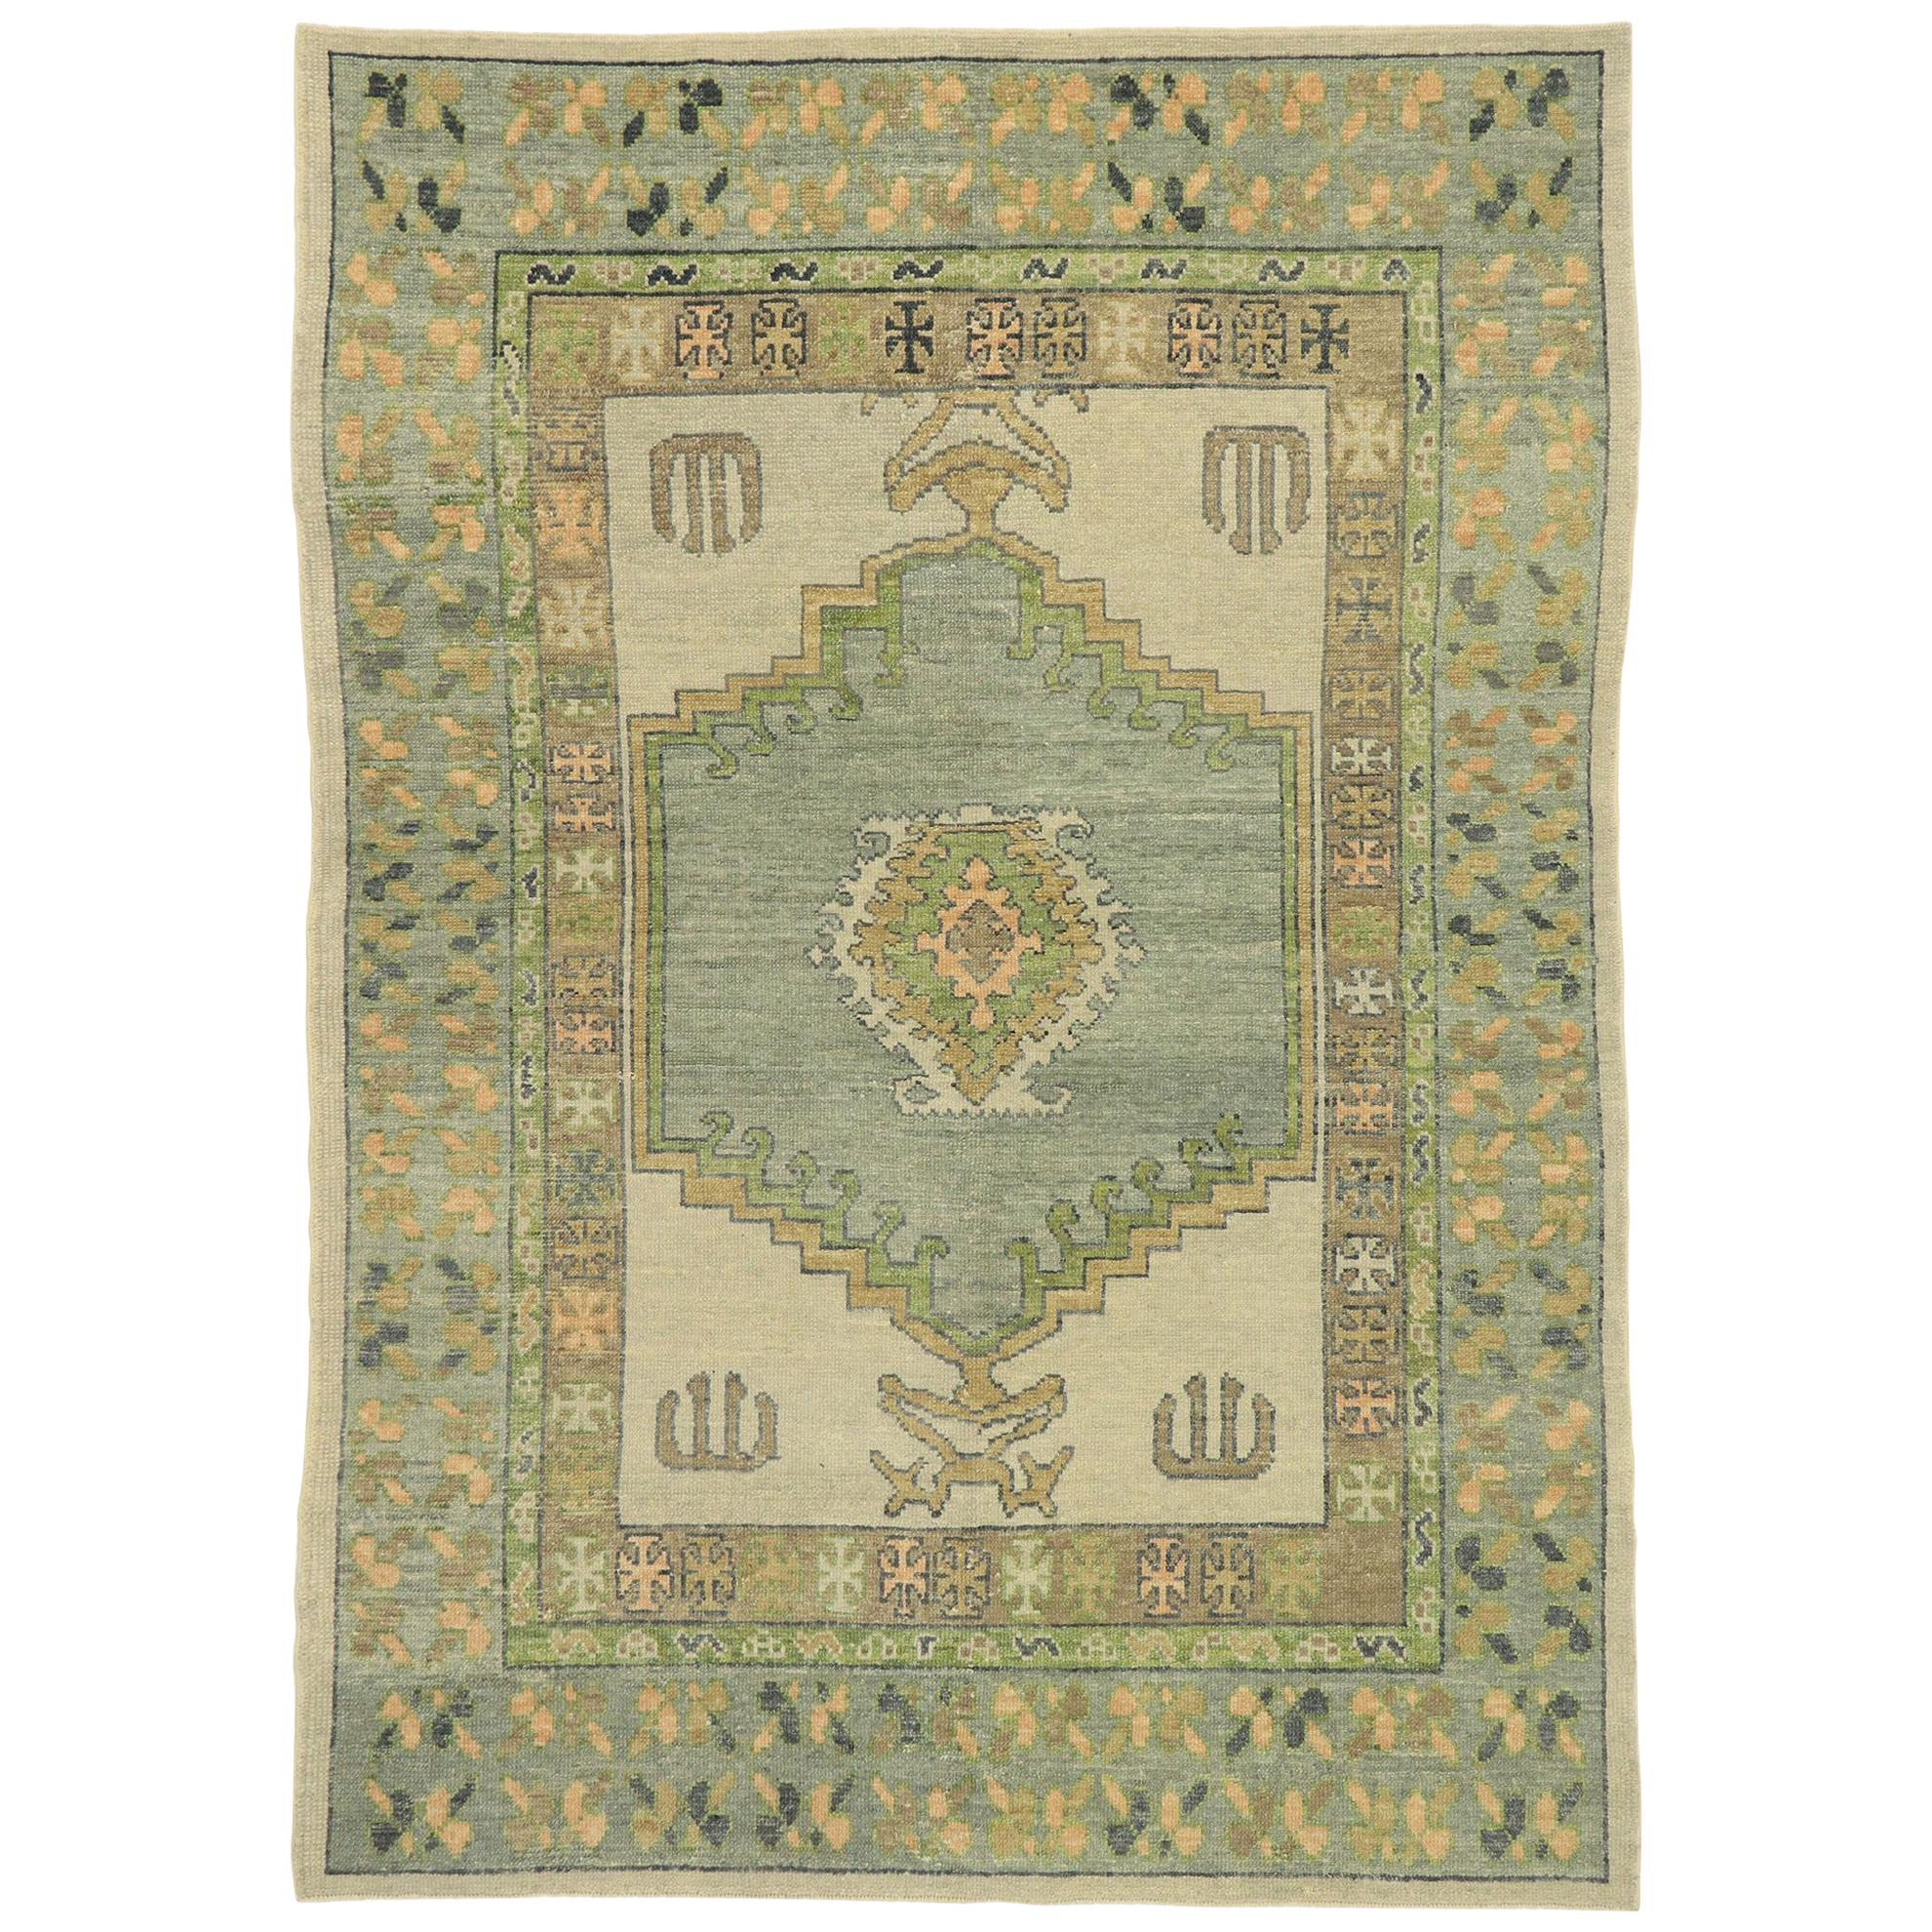 New Contemporary Turkish Oushak Rug with Modern Tribal Boho Chic Style